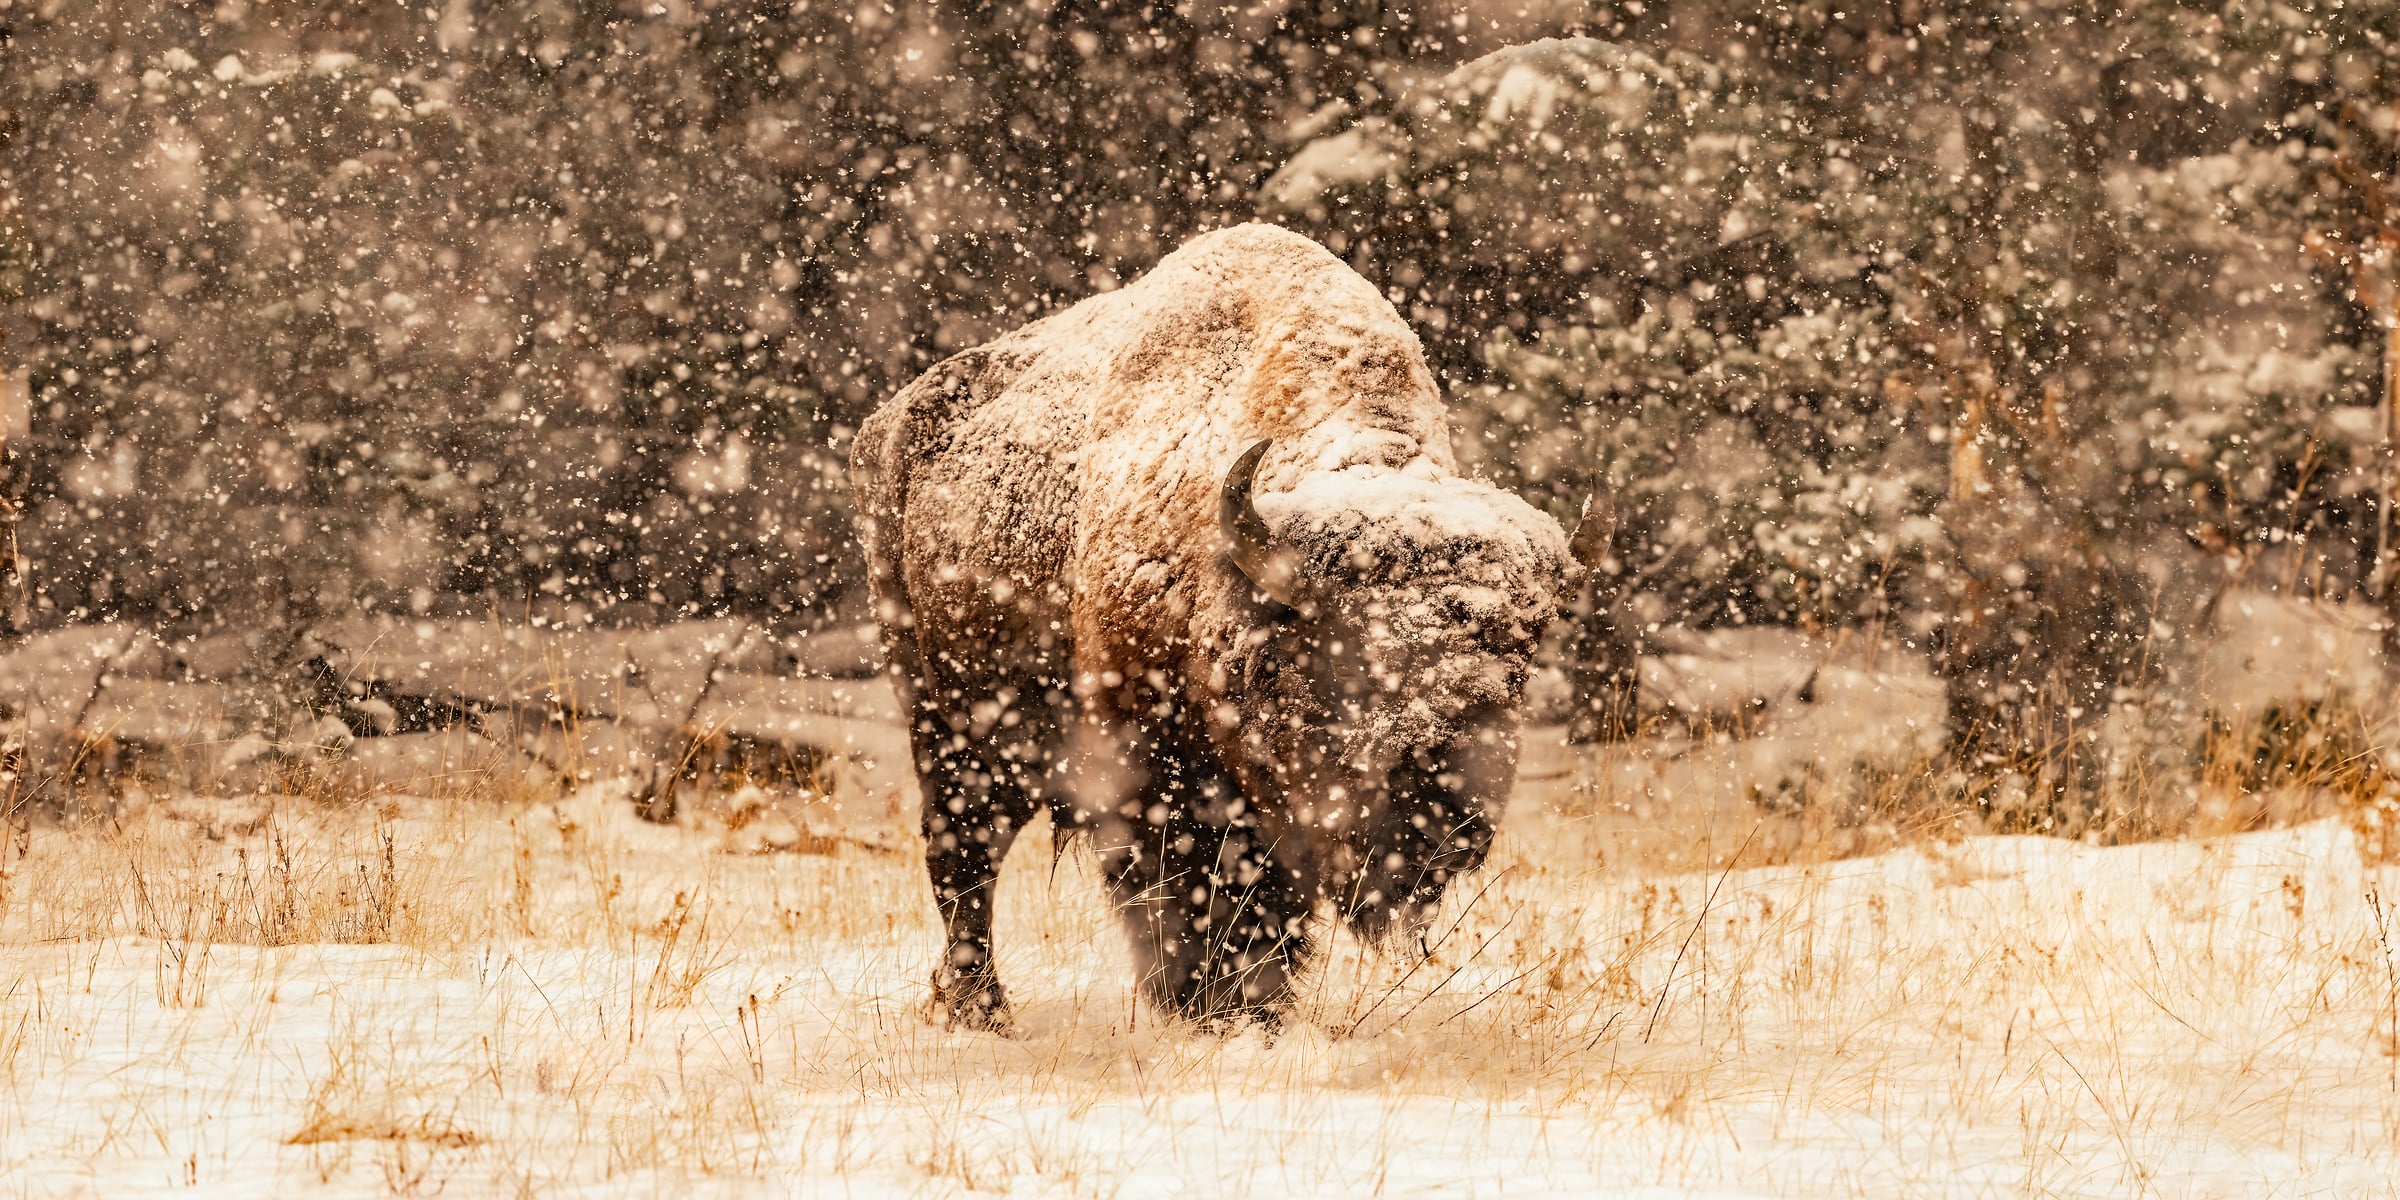 196 megapixels! A very high resolution, large-format VAST photo print of a bison in the snow in Yellowstone National Park; wildlife photograph created by David David in Wyoming.